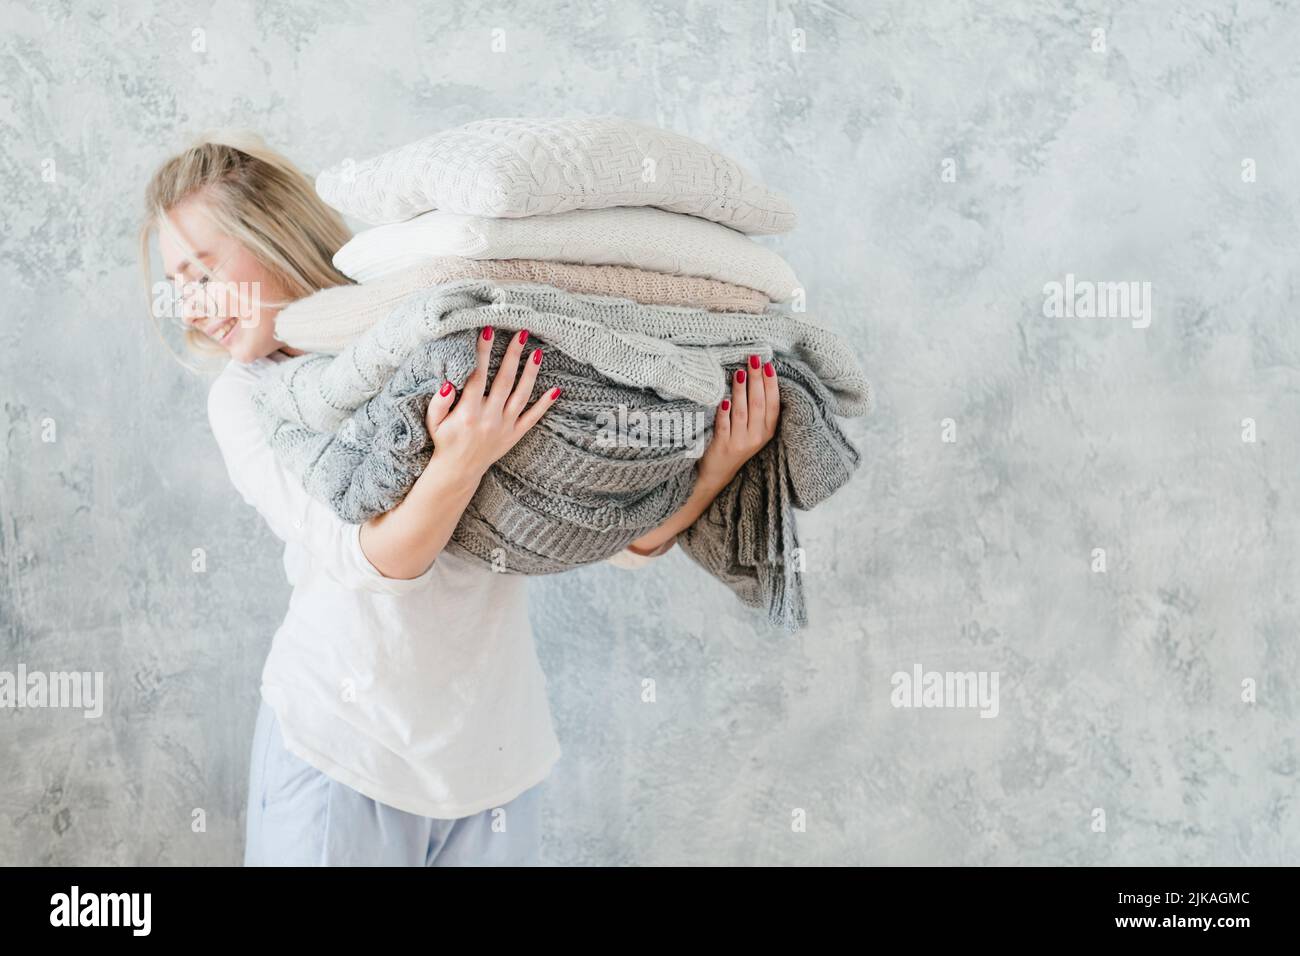 cold season home textile knitted blanket pillow Stock Photo